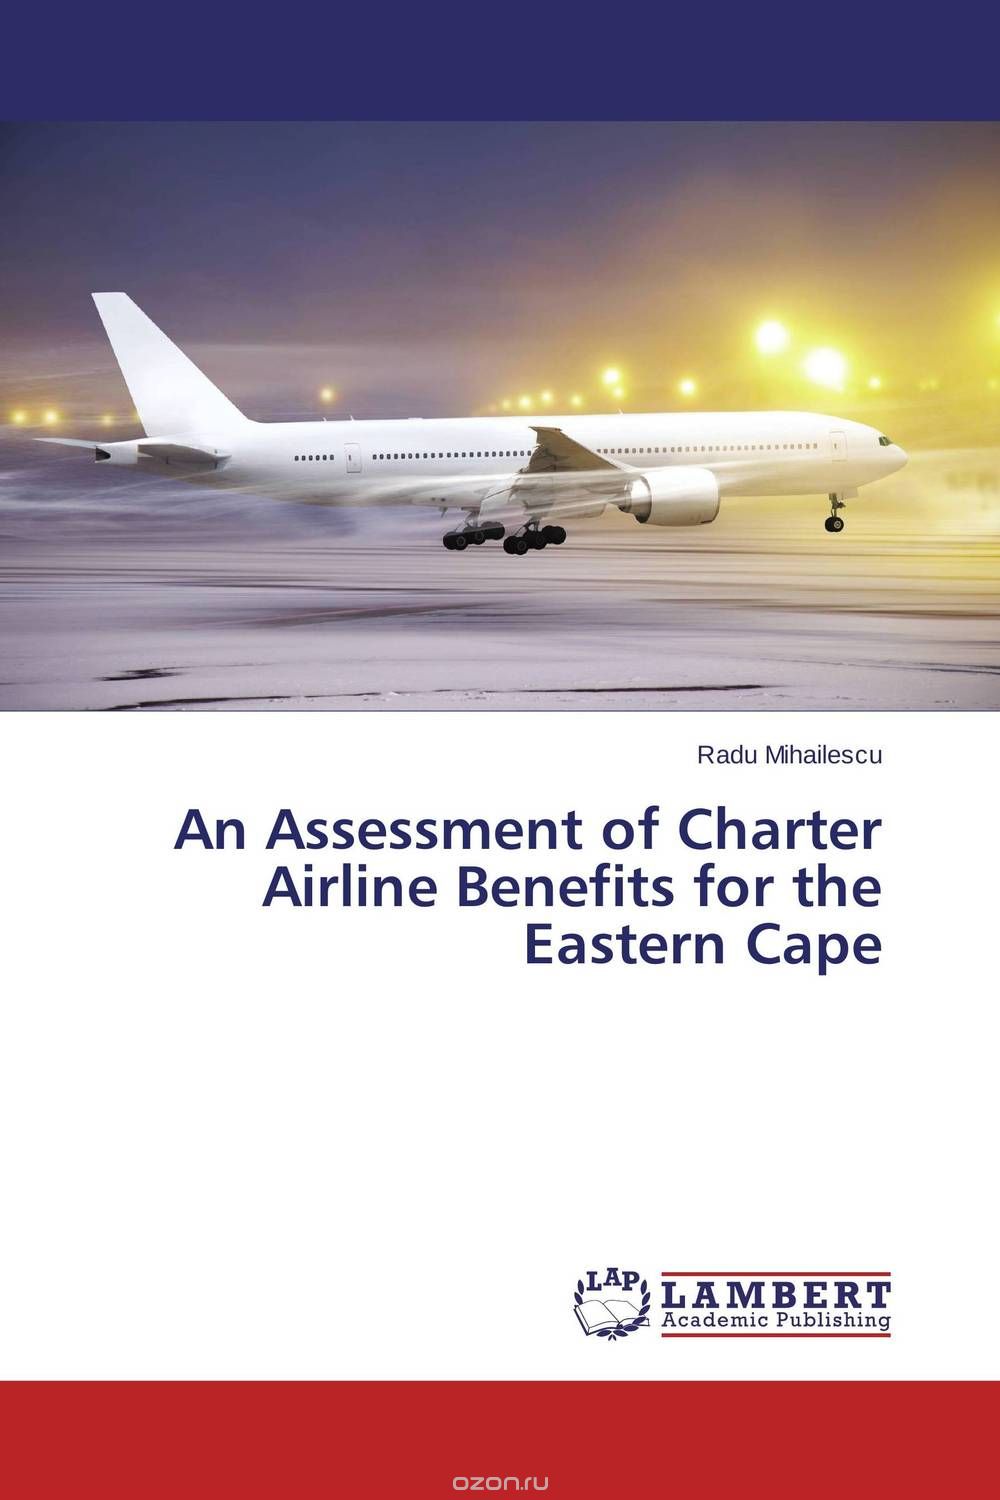 Скачать книгу "An Assessment of Charter Airline Benefits for the Eastern Cape"